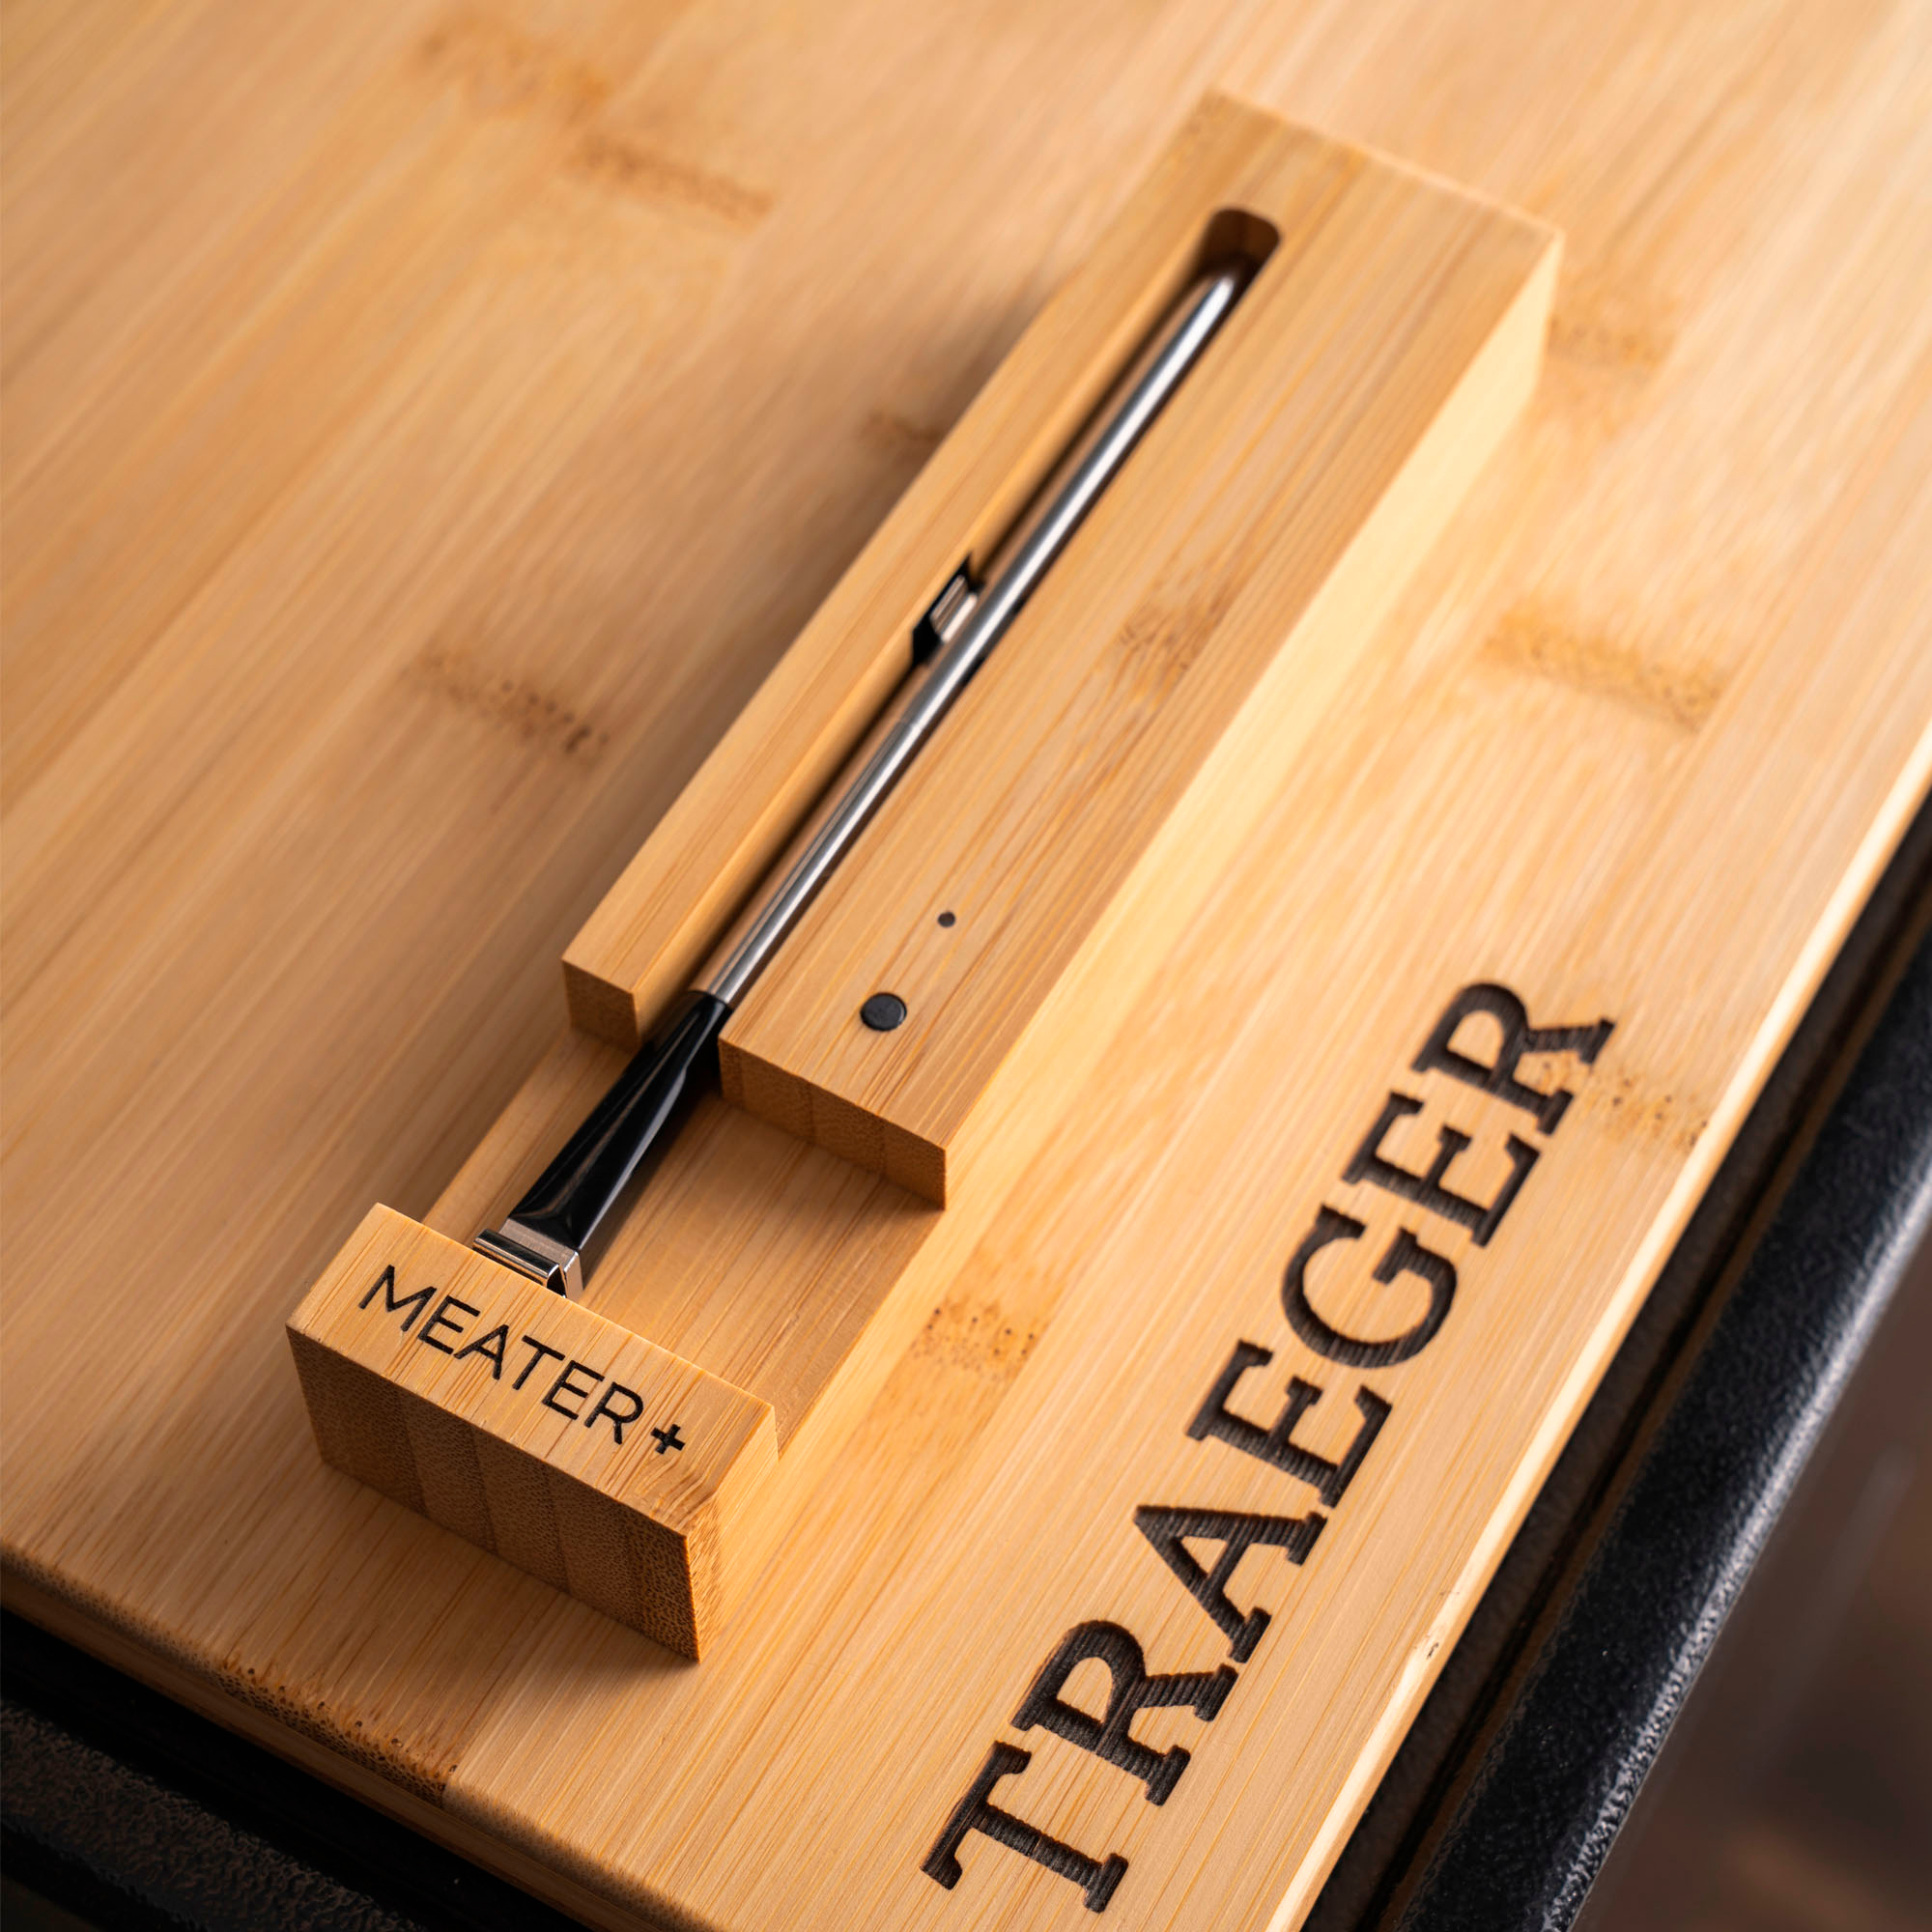 Traeger Grills - MEATER Plus wireless meat thermometer - Multi